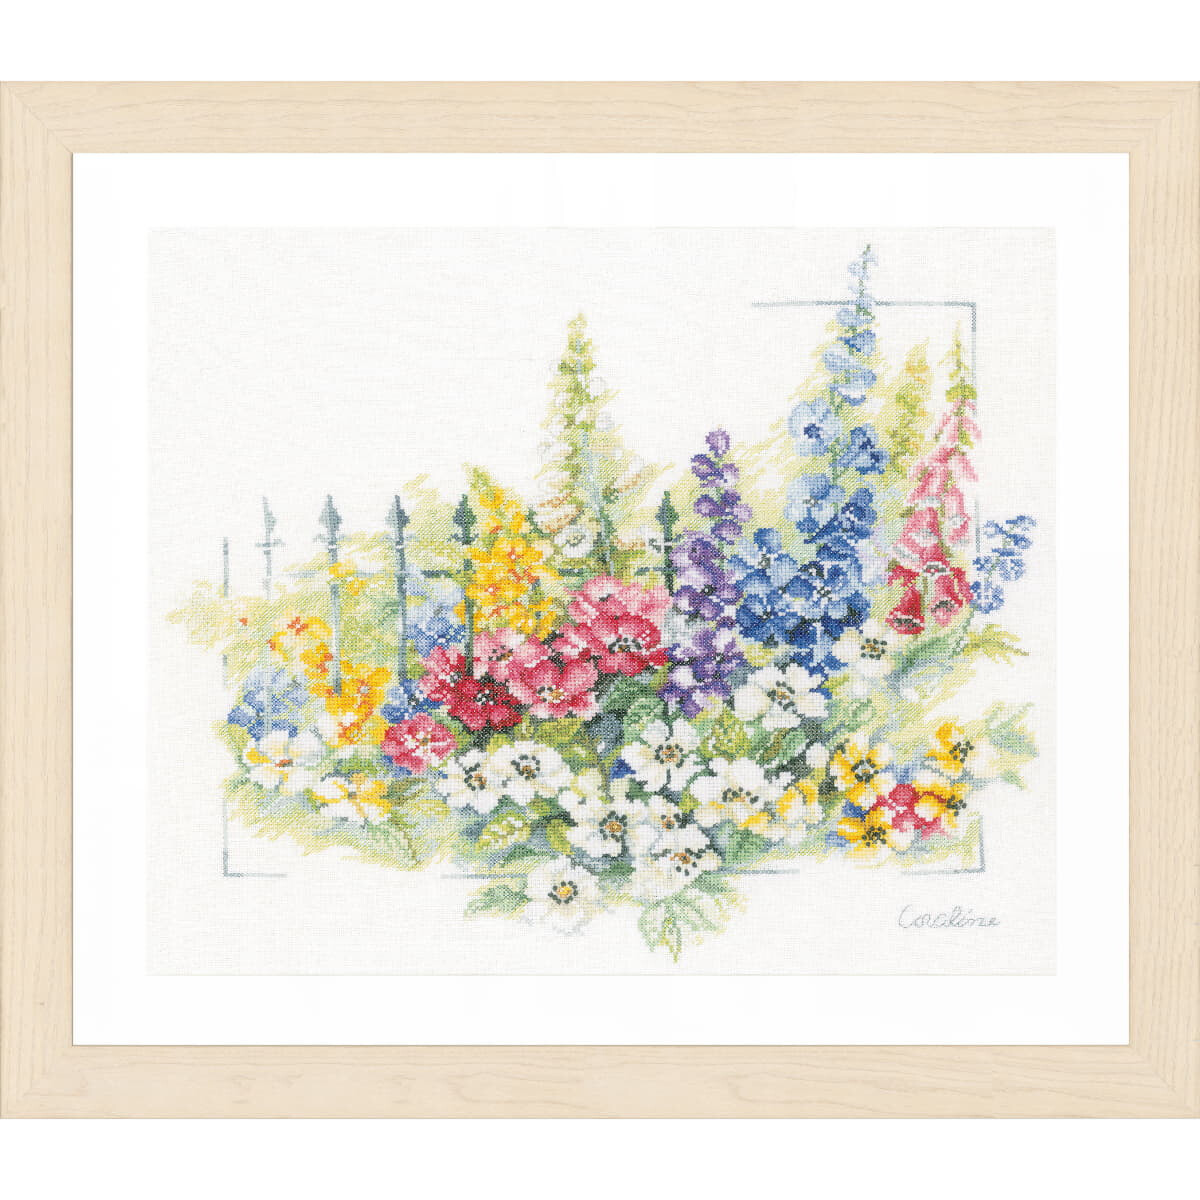 A framed cross stitch artwork created with Lanartes...